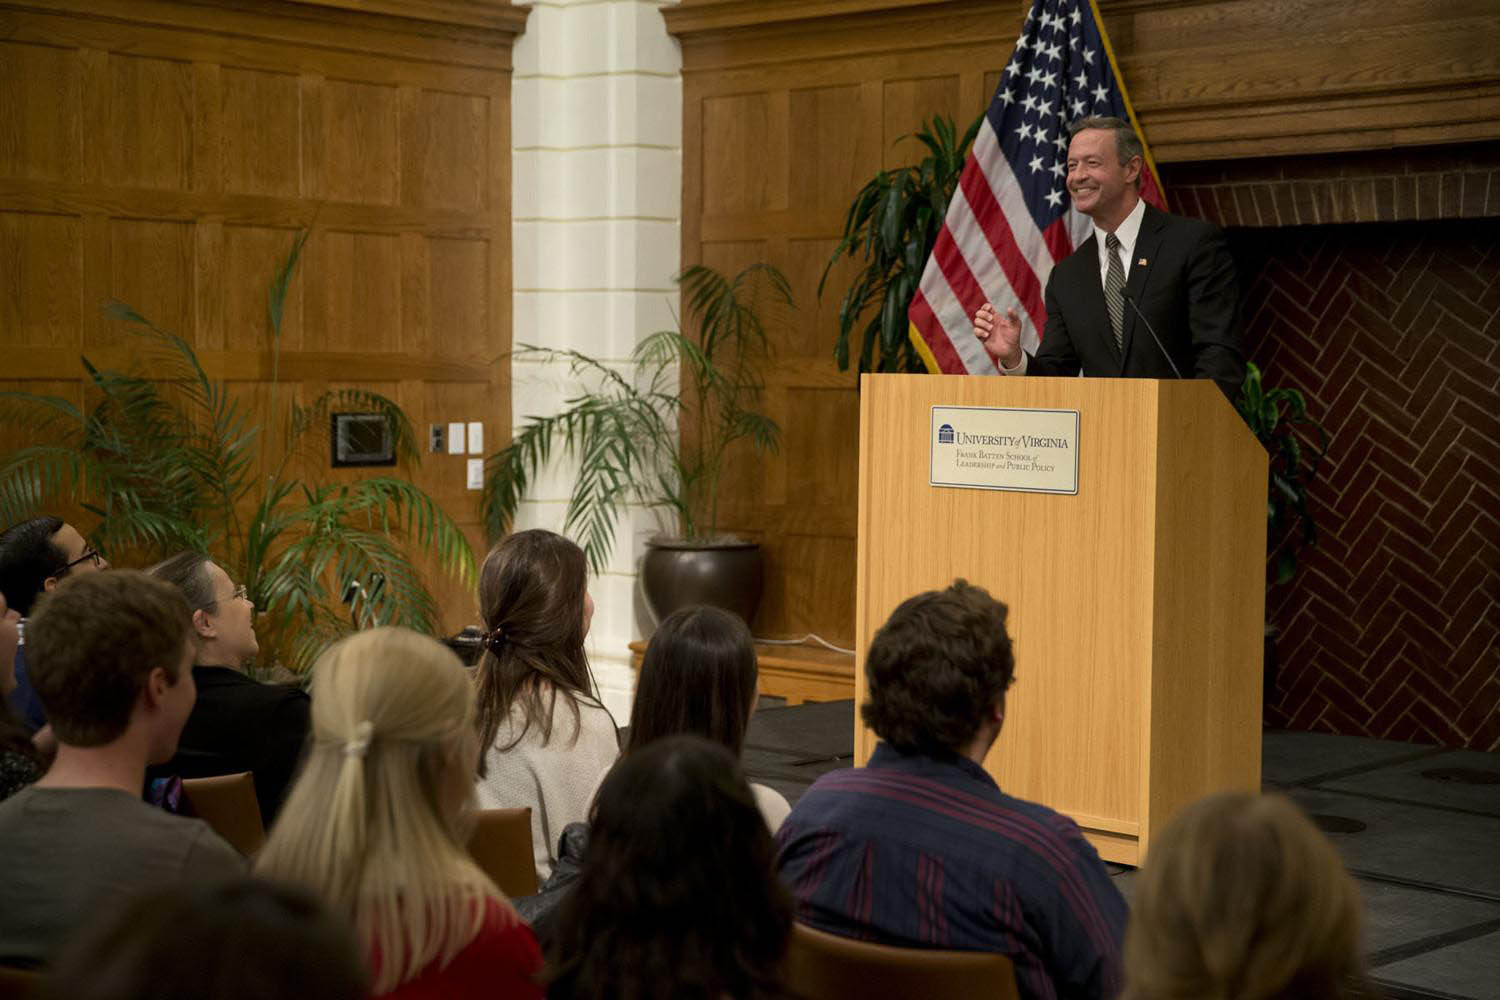 Martin O’Malley speaking at a podium to a group of students